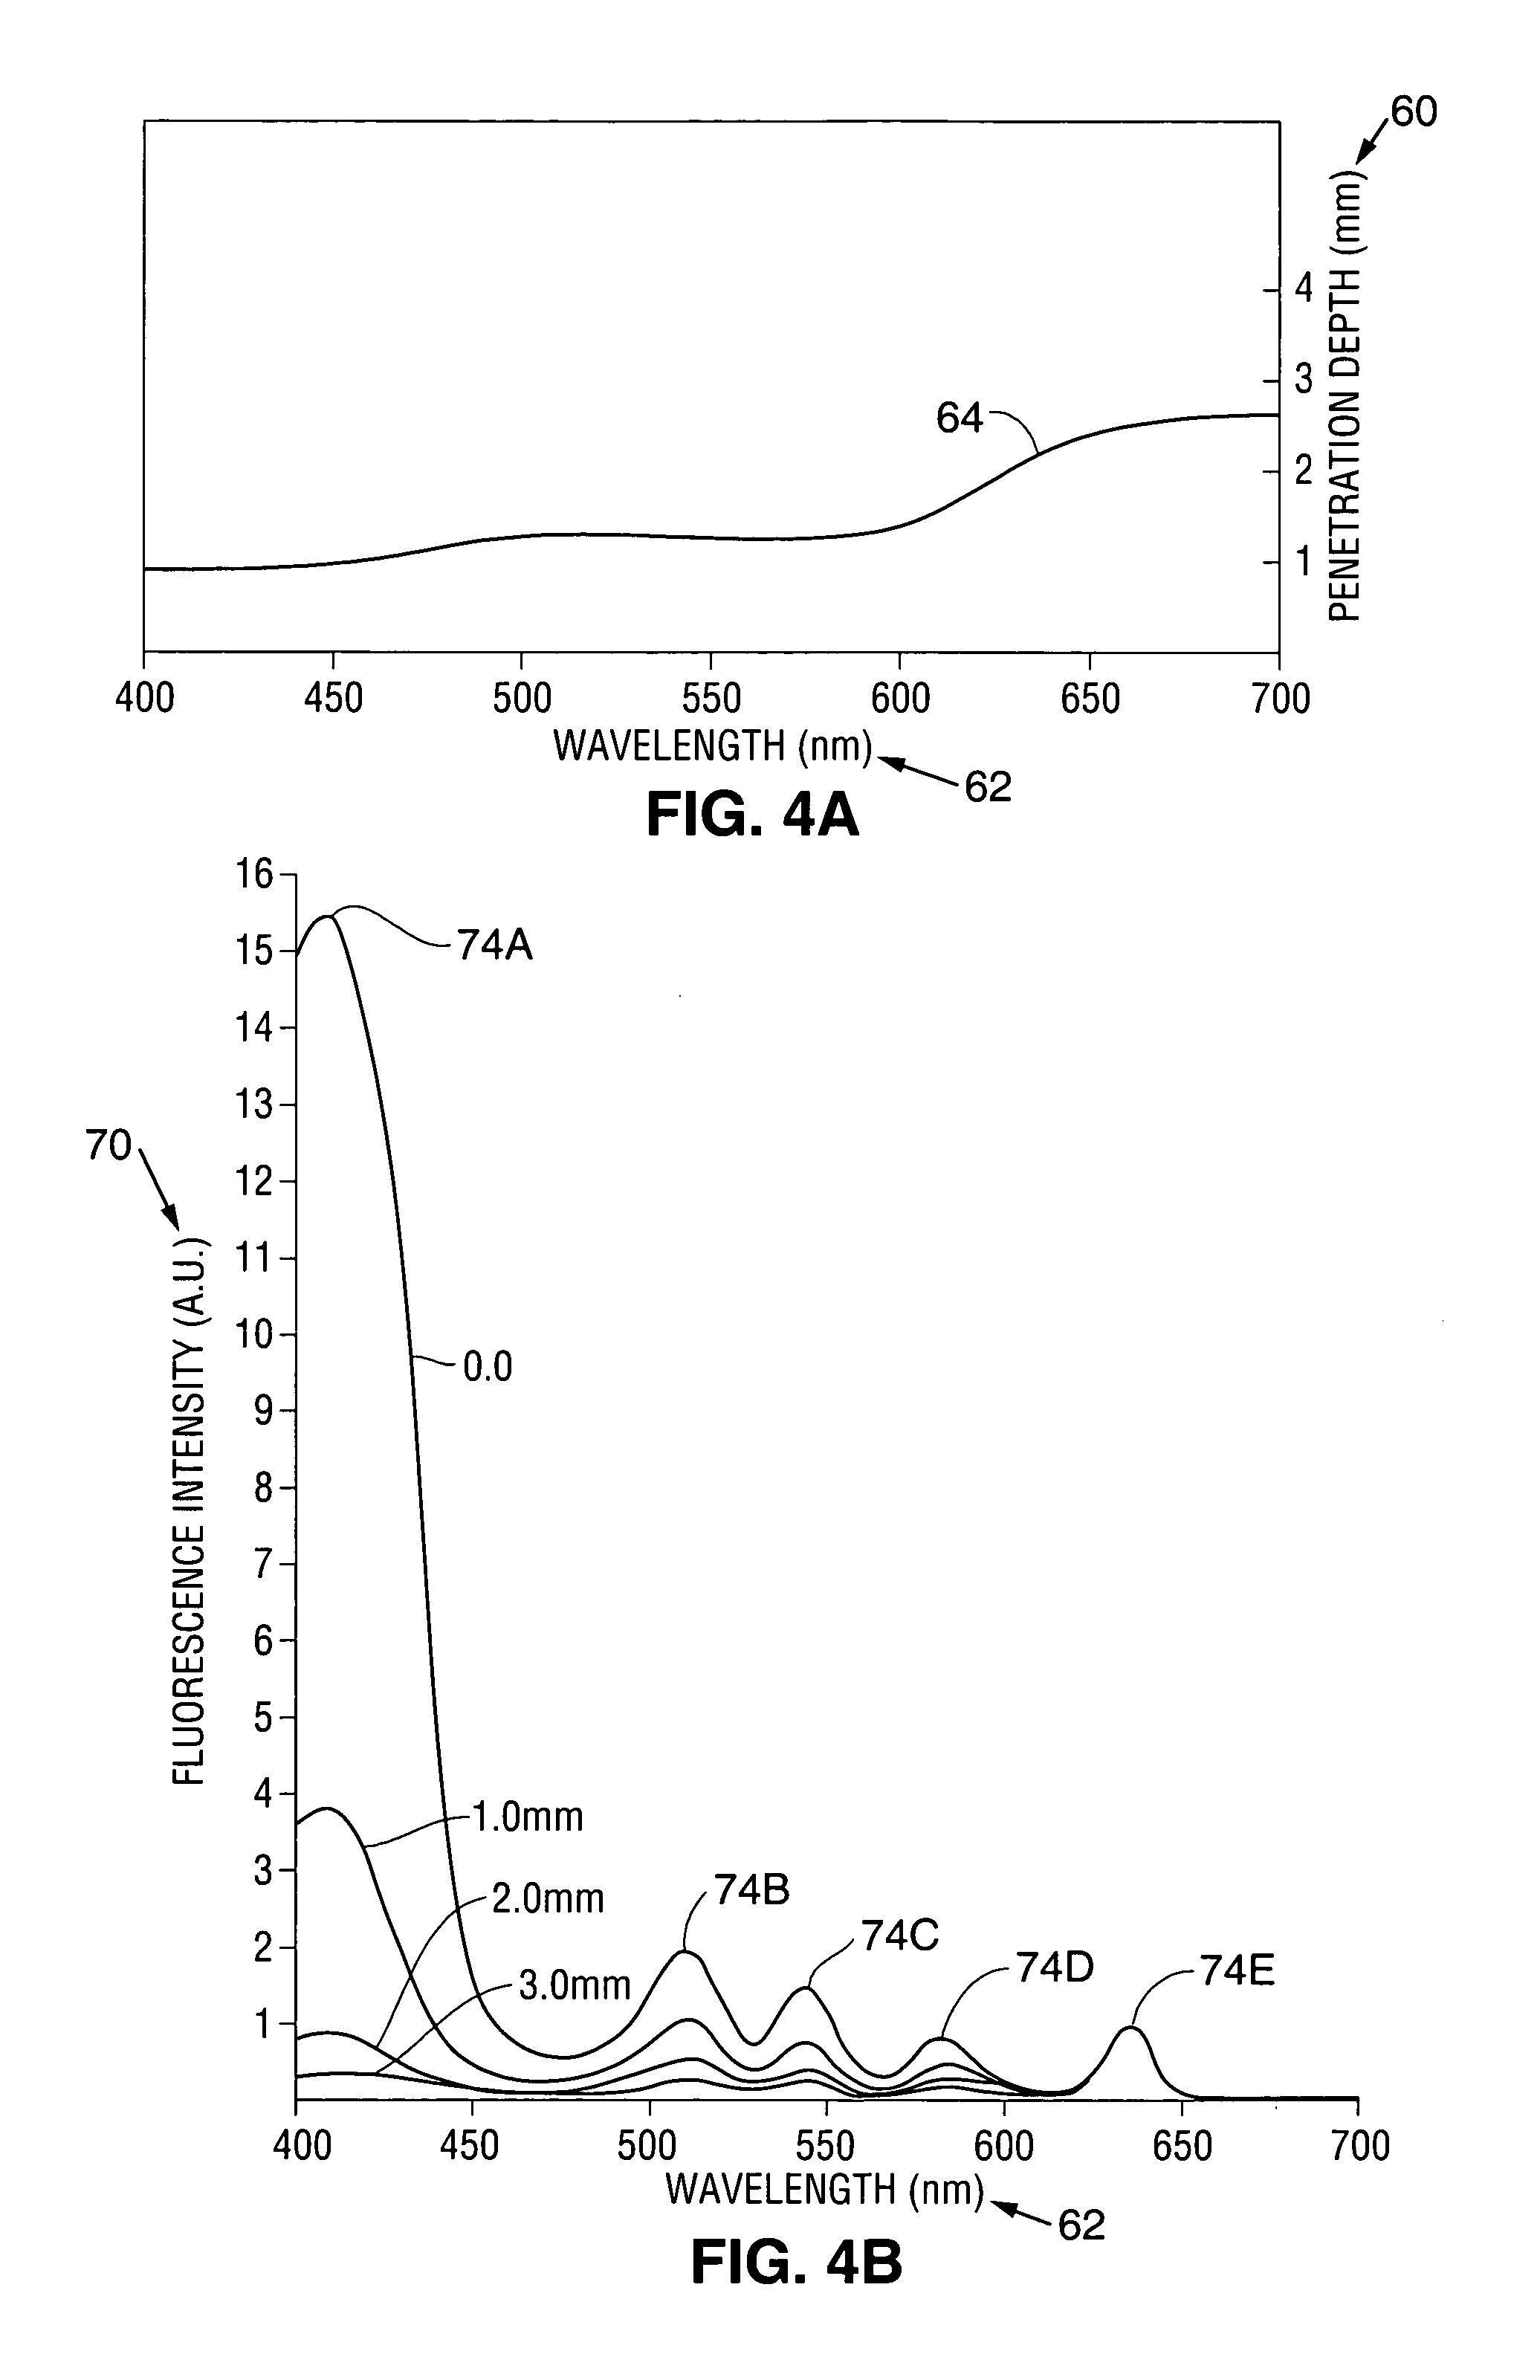 System and method for treating exposed tissue with light emitting diodes